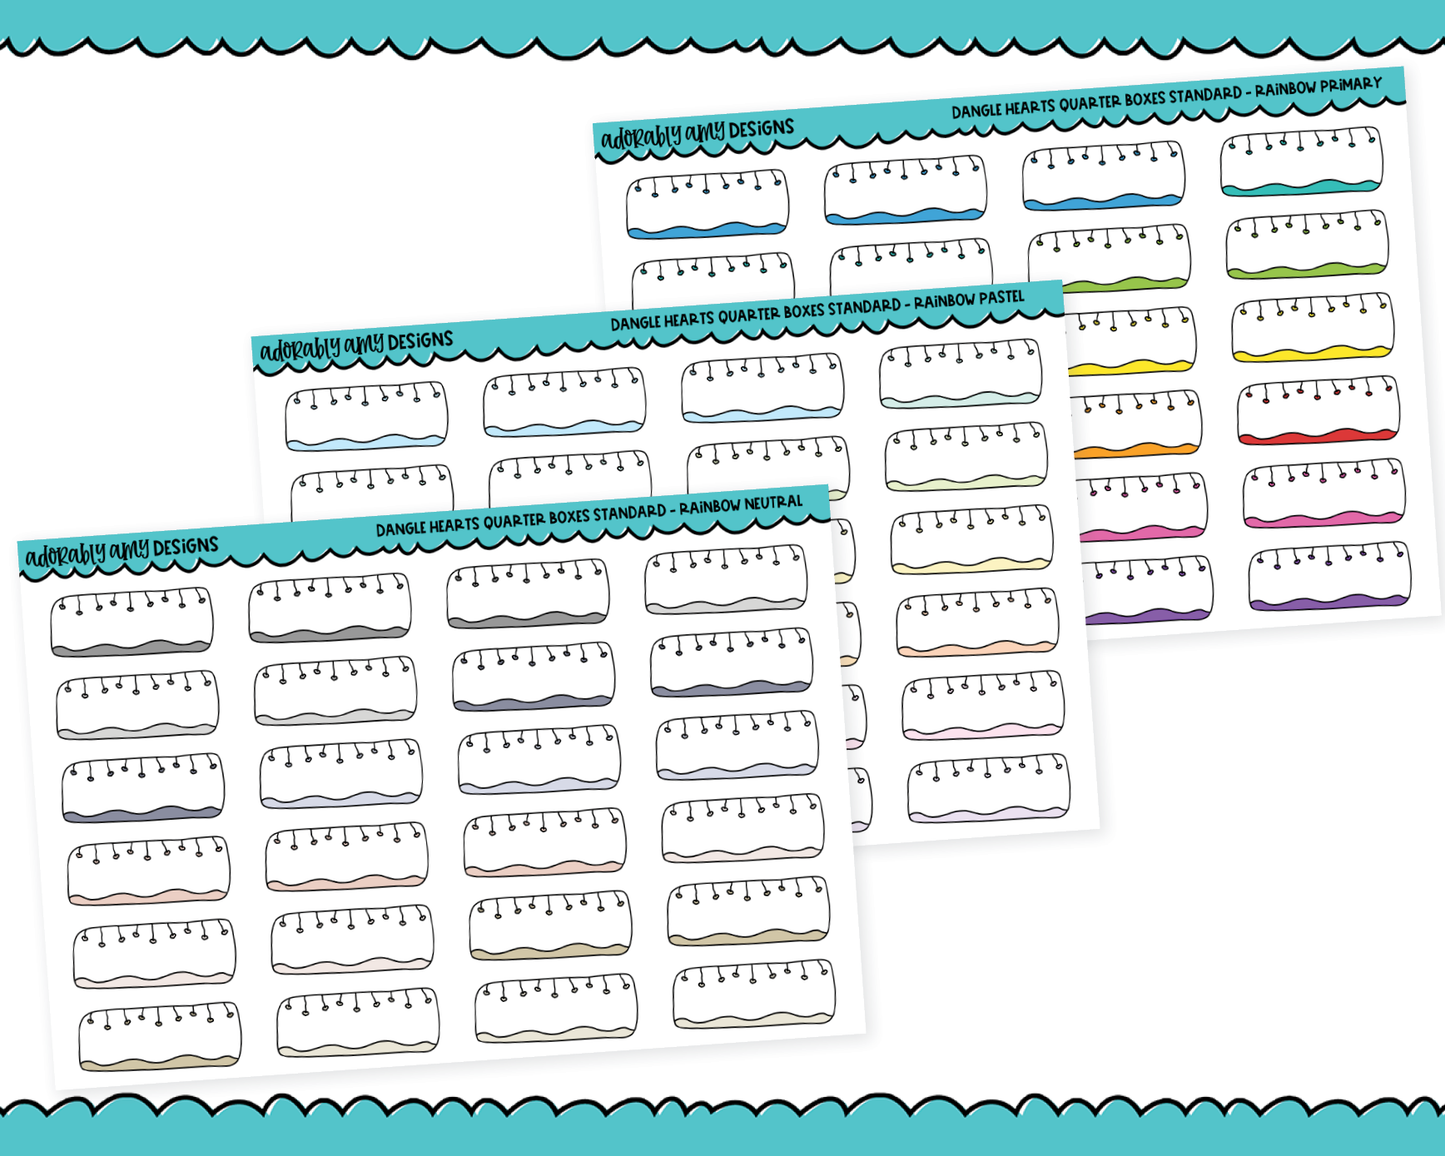 Rainbow Dangle Hearts Quarter Boxes Standard Stickers for any Planner or Insert